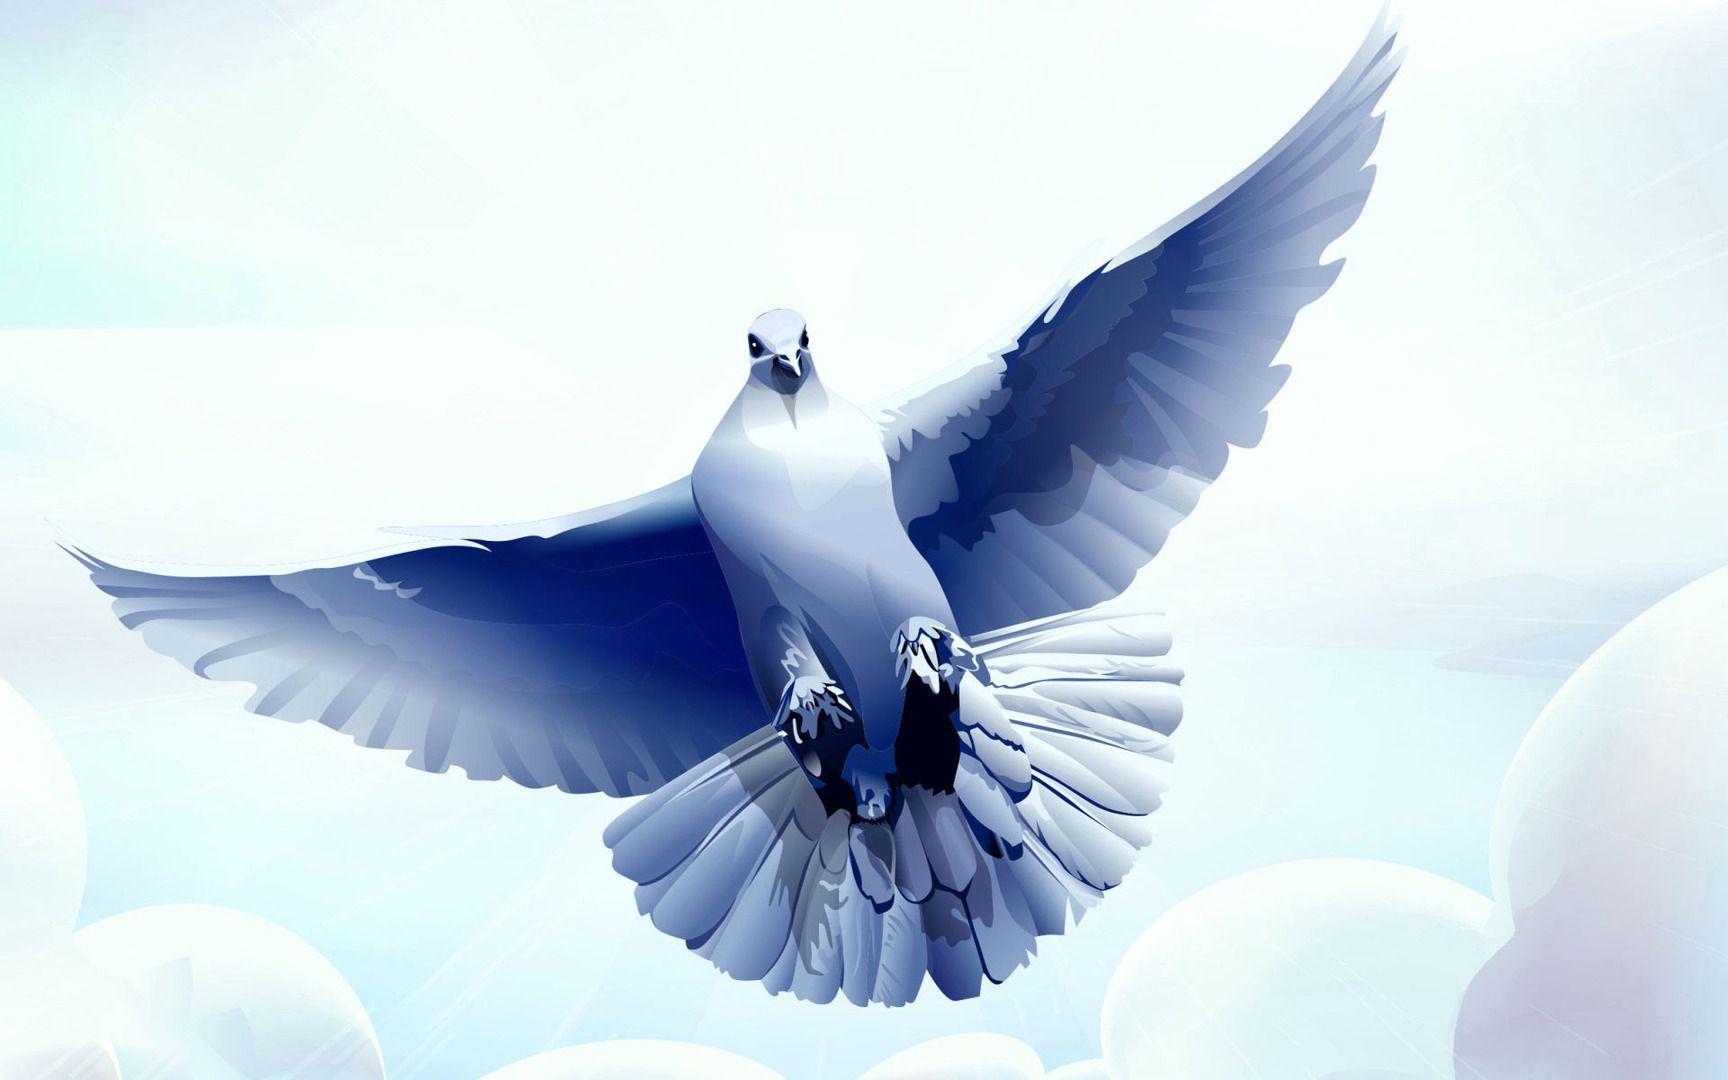 dove wallpaper qkqhn - Image And Wallpaper free to download